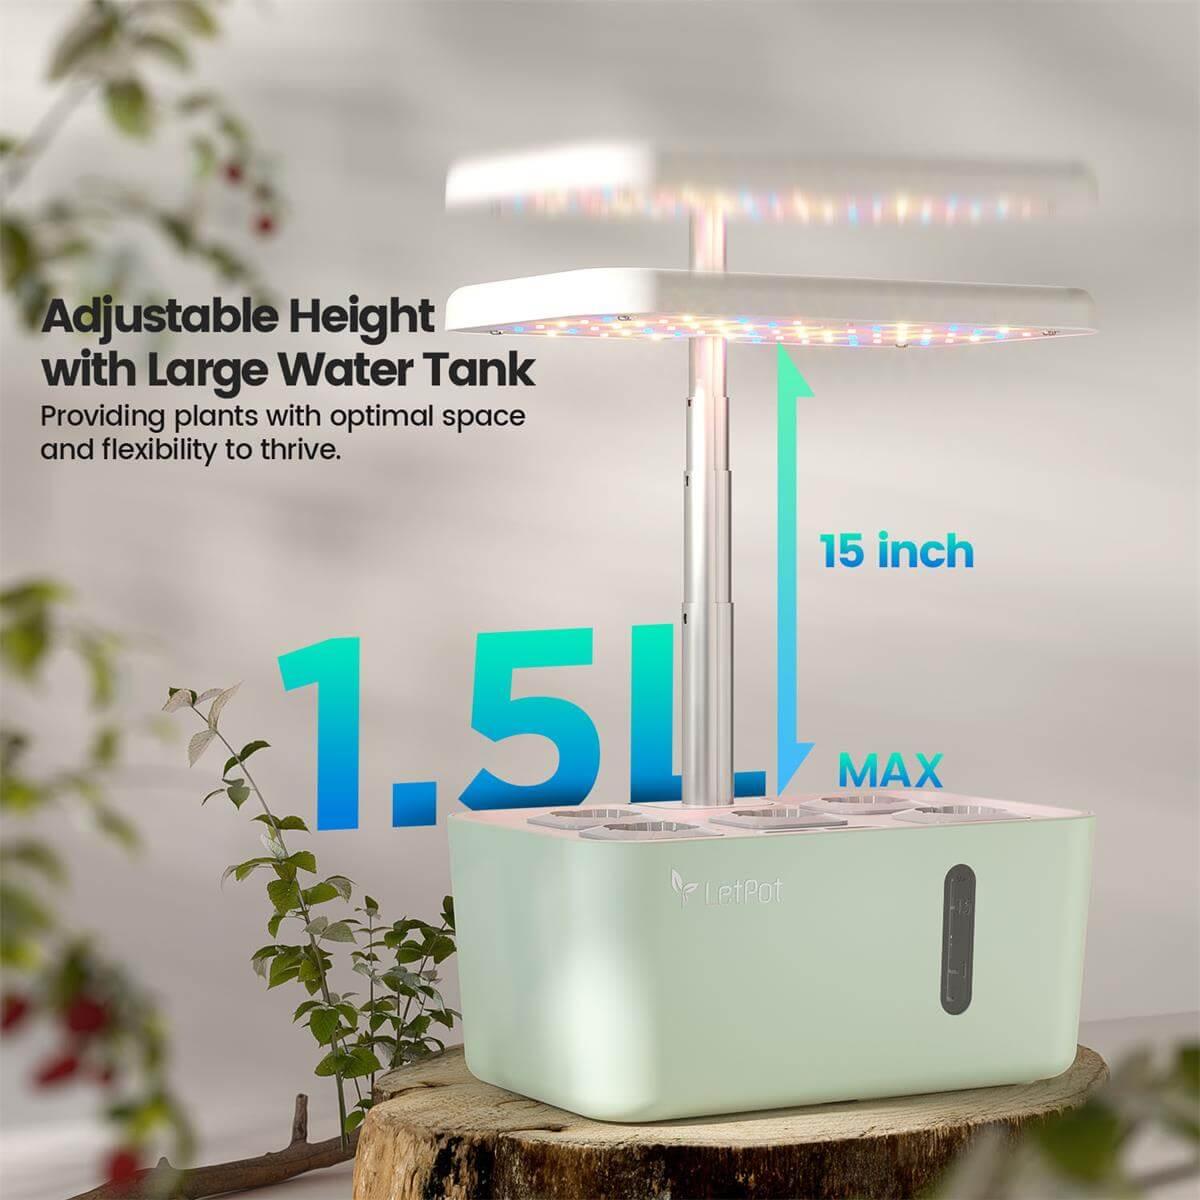 Adjustable Led light for Small hydroponic gardening indoor